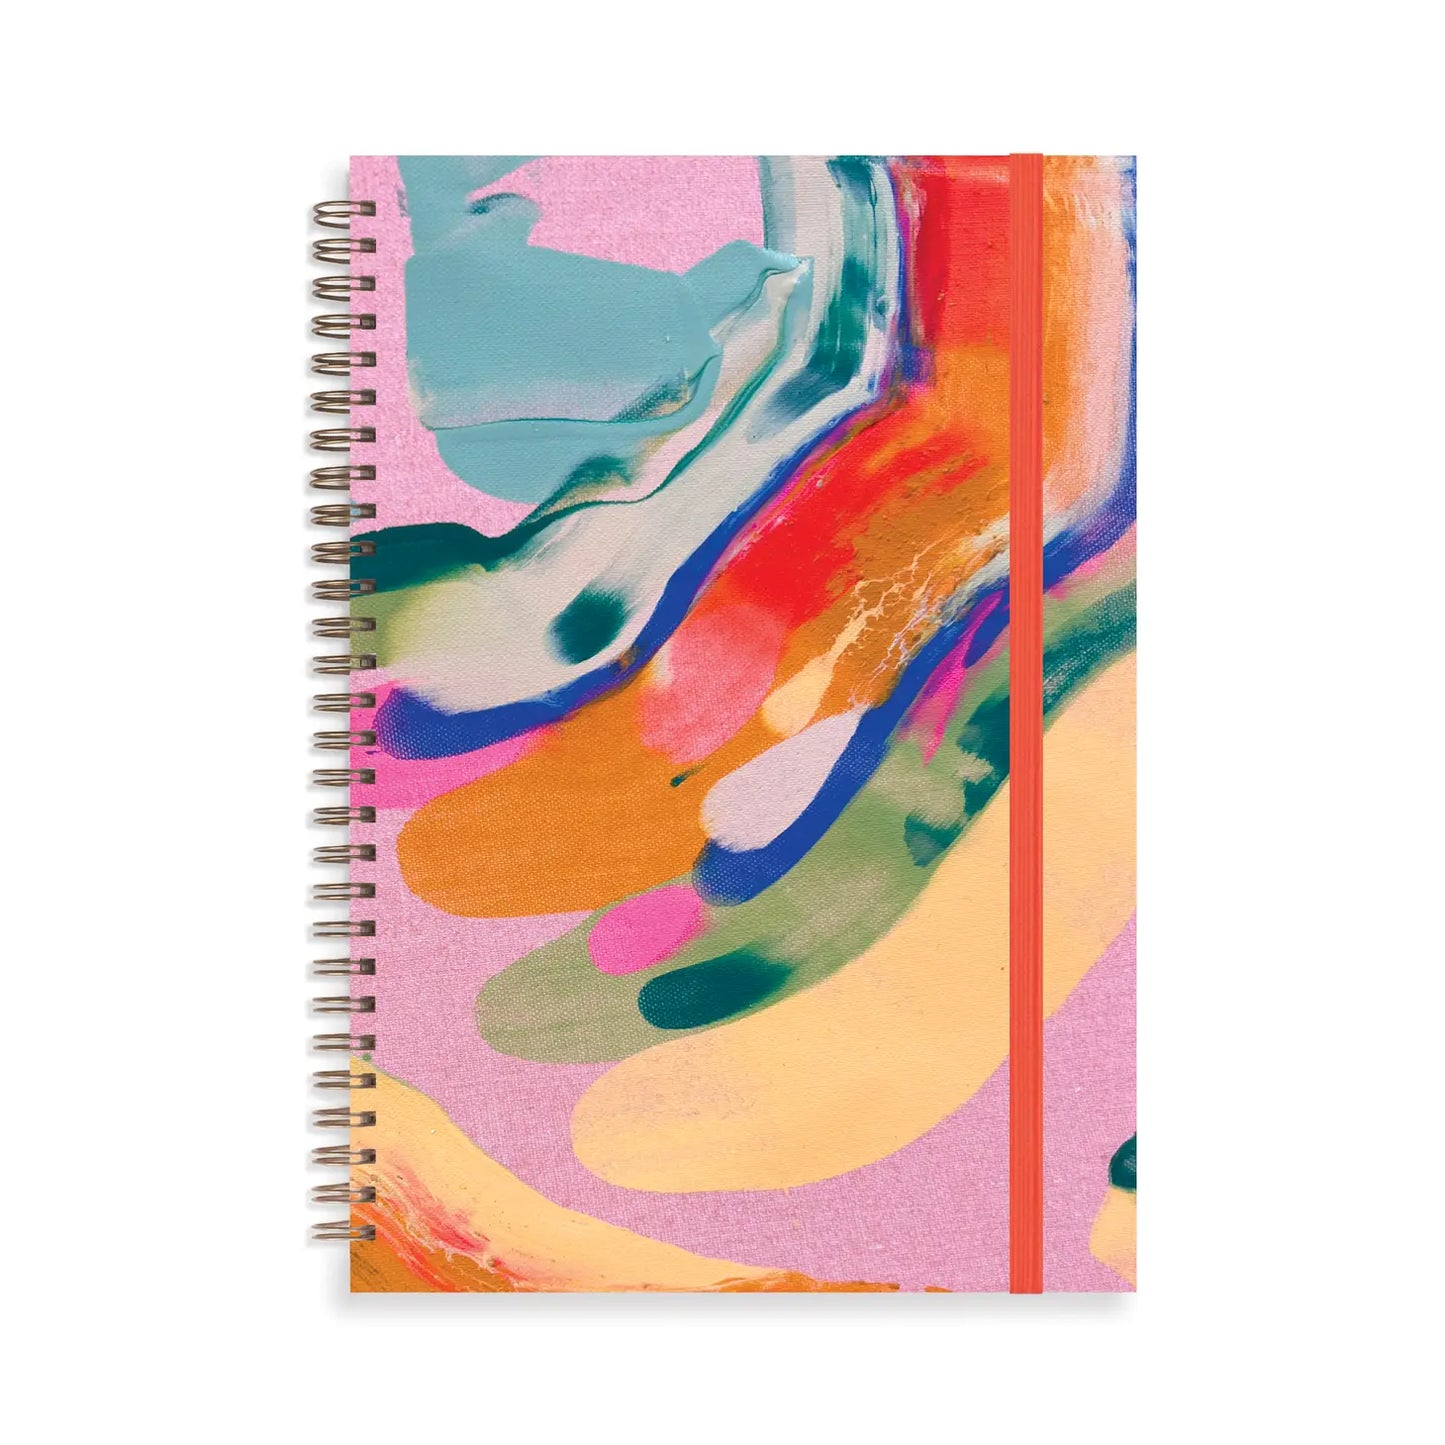 Palmita Painted Cover 7" x 10" Notebook (Ruled Pages)